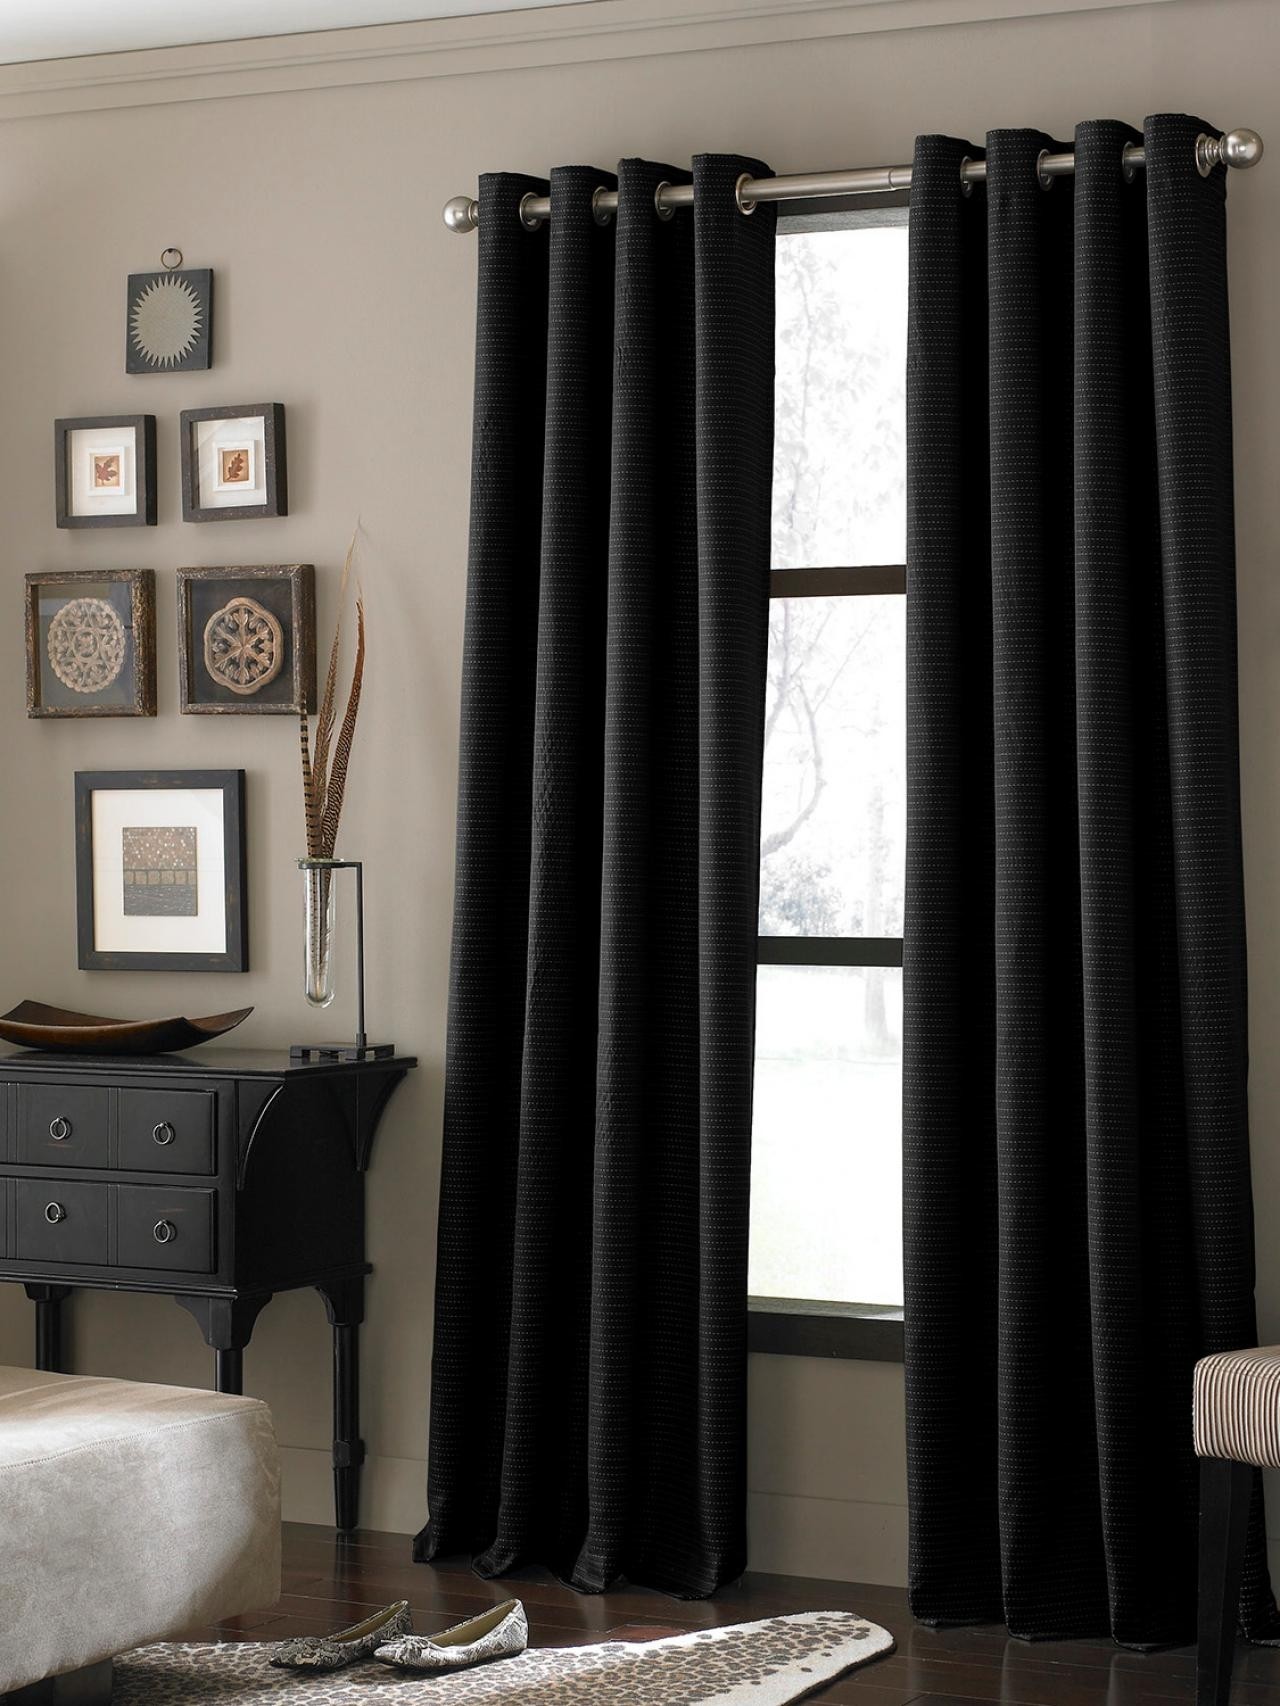 Curtains pictures